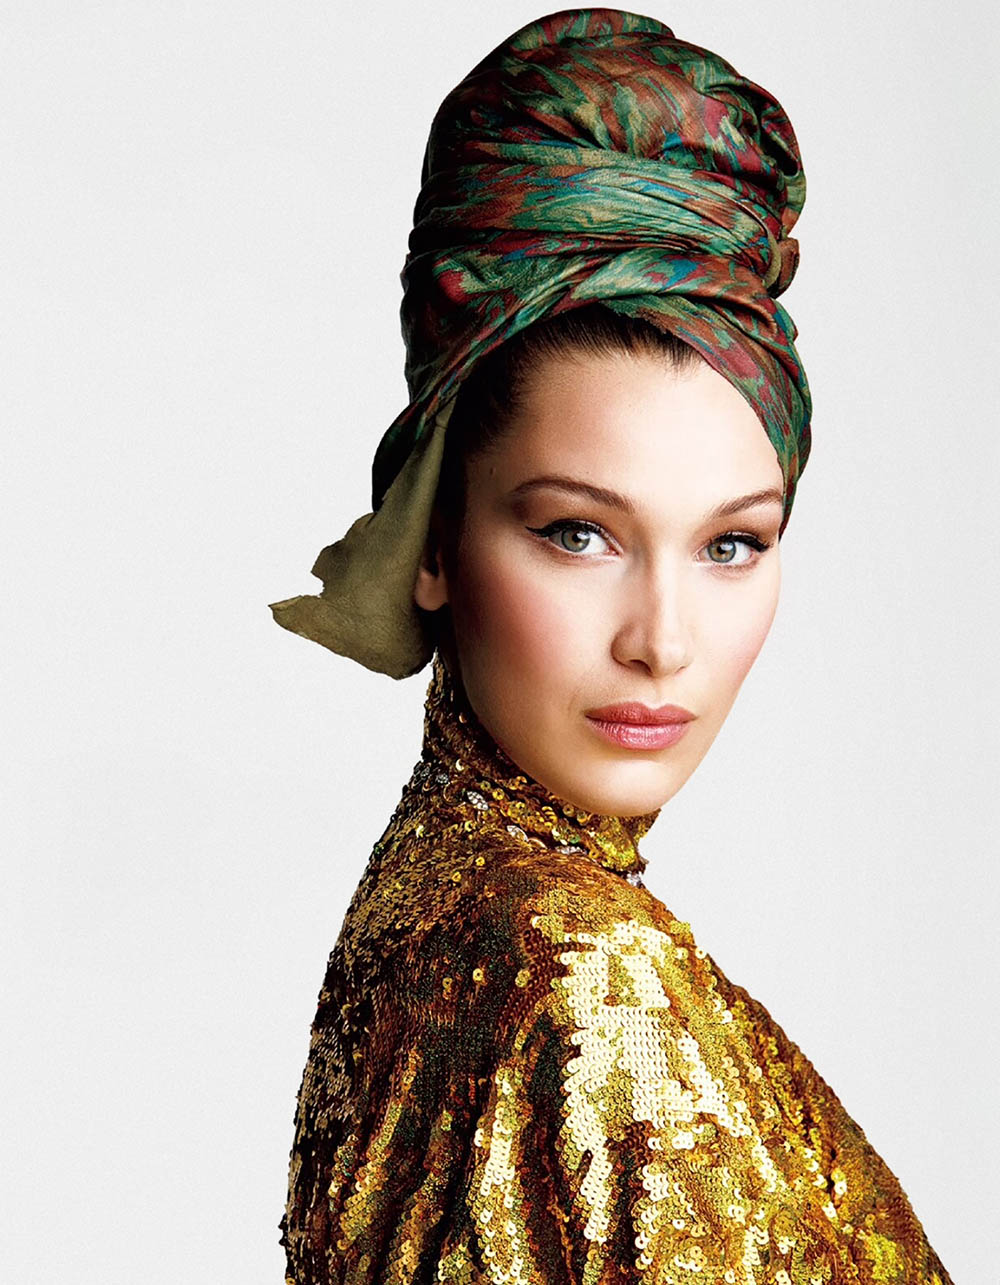 Bella Hadid covers Vogue Japan May 2018 by Patrick Demarchelier